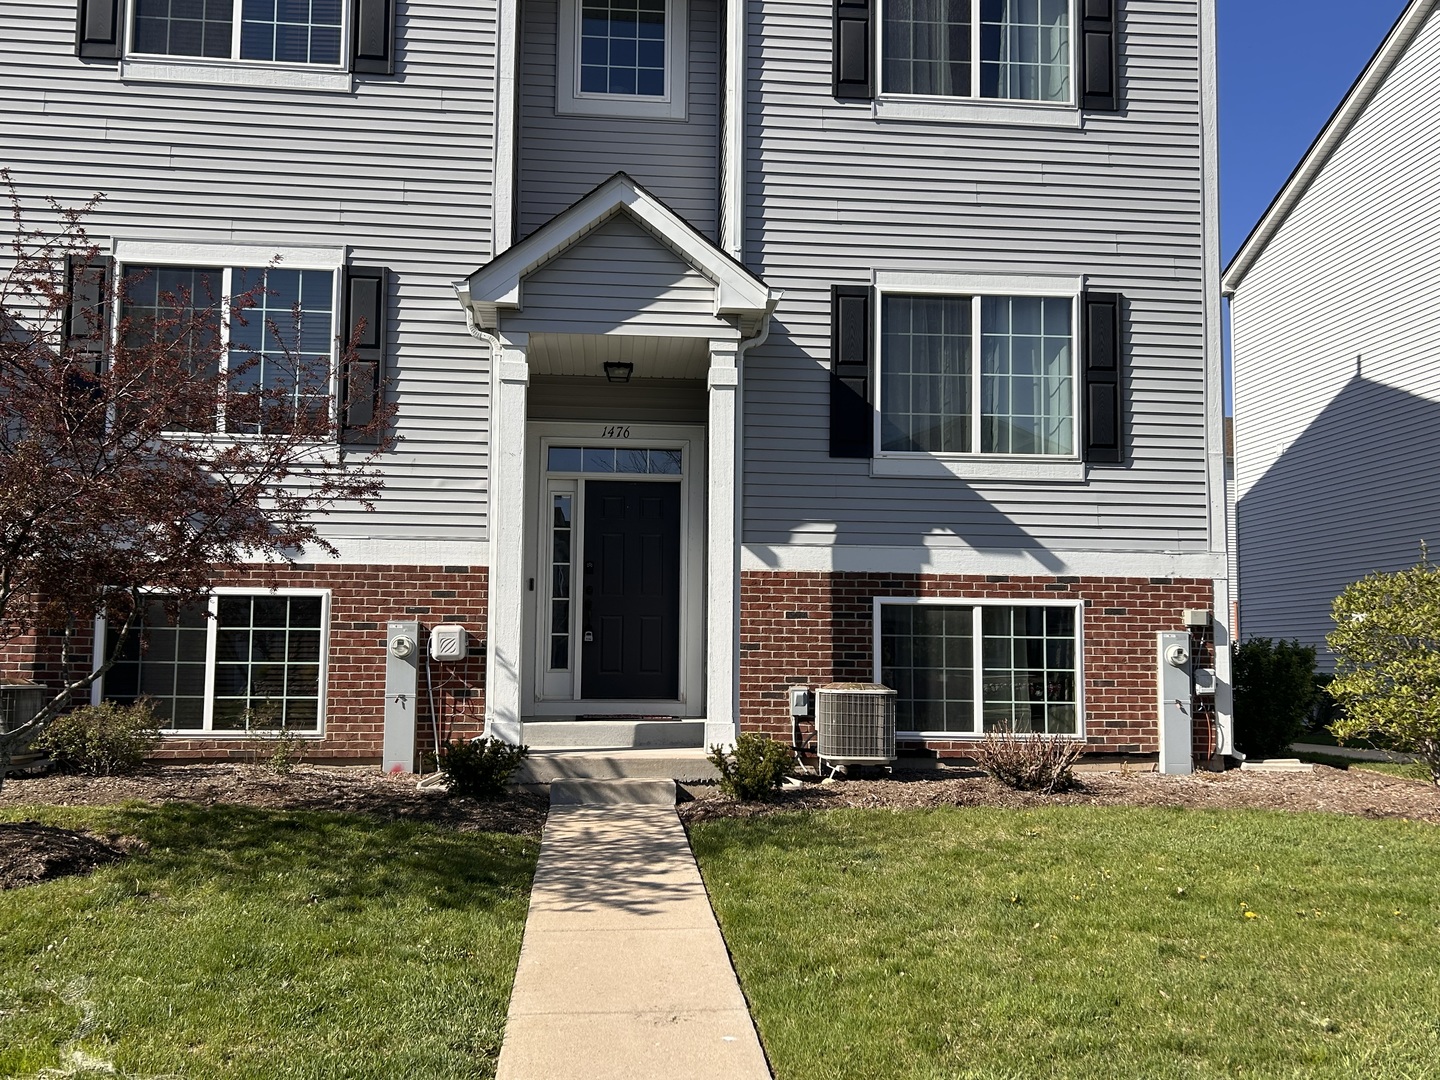 View Montgomery, IL 60538 townhome